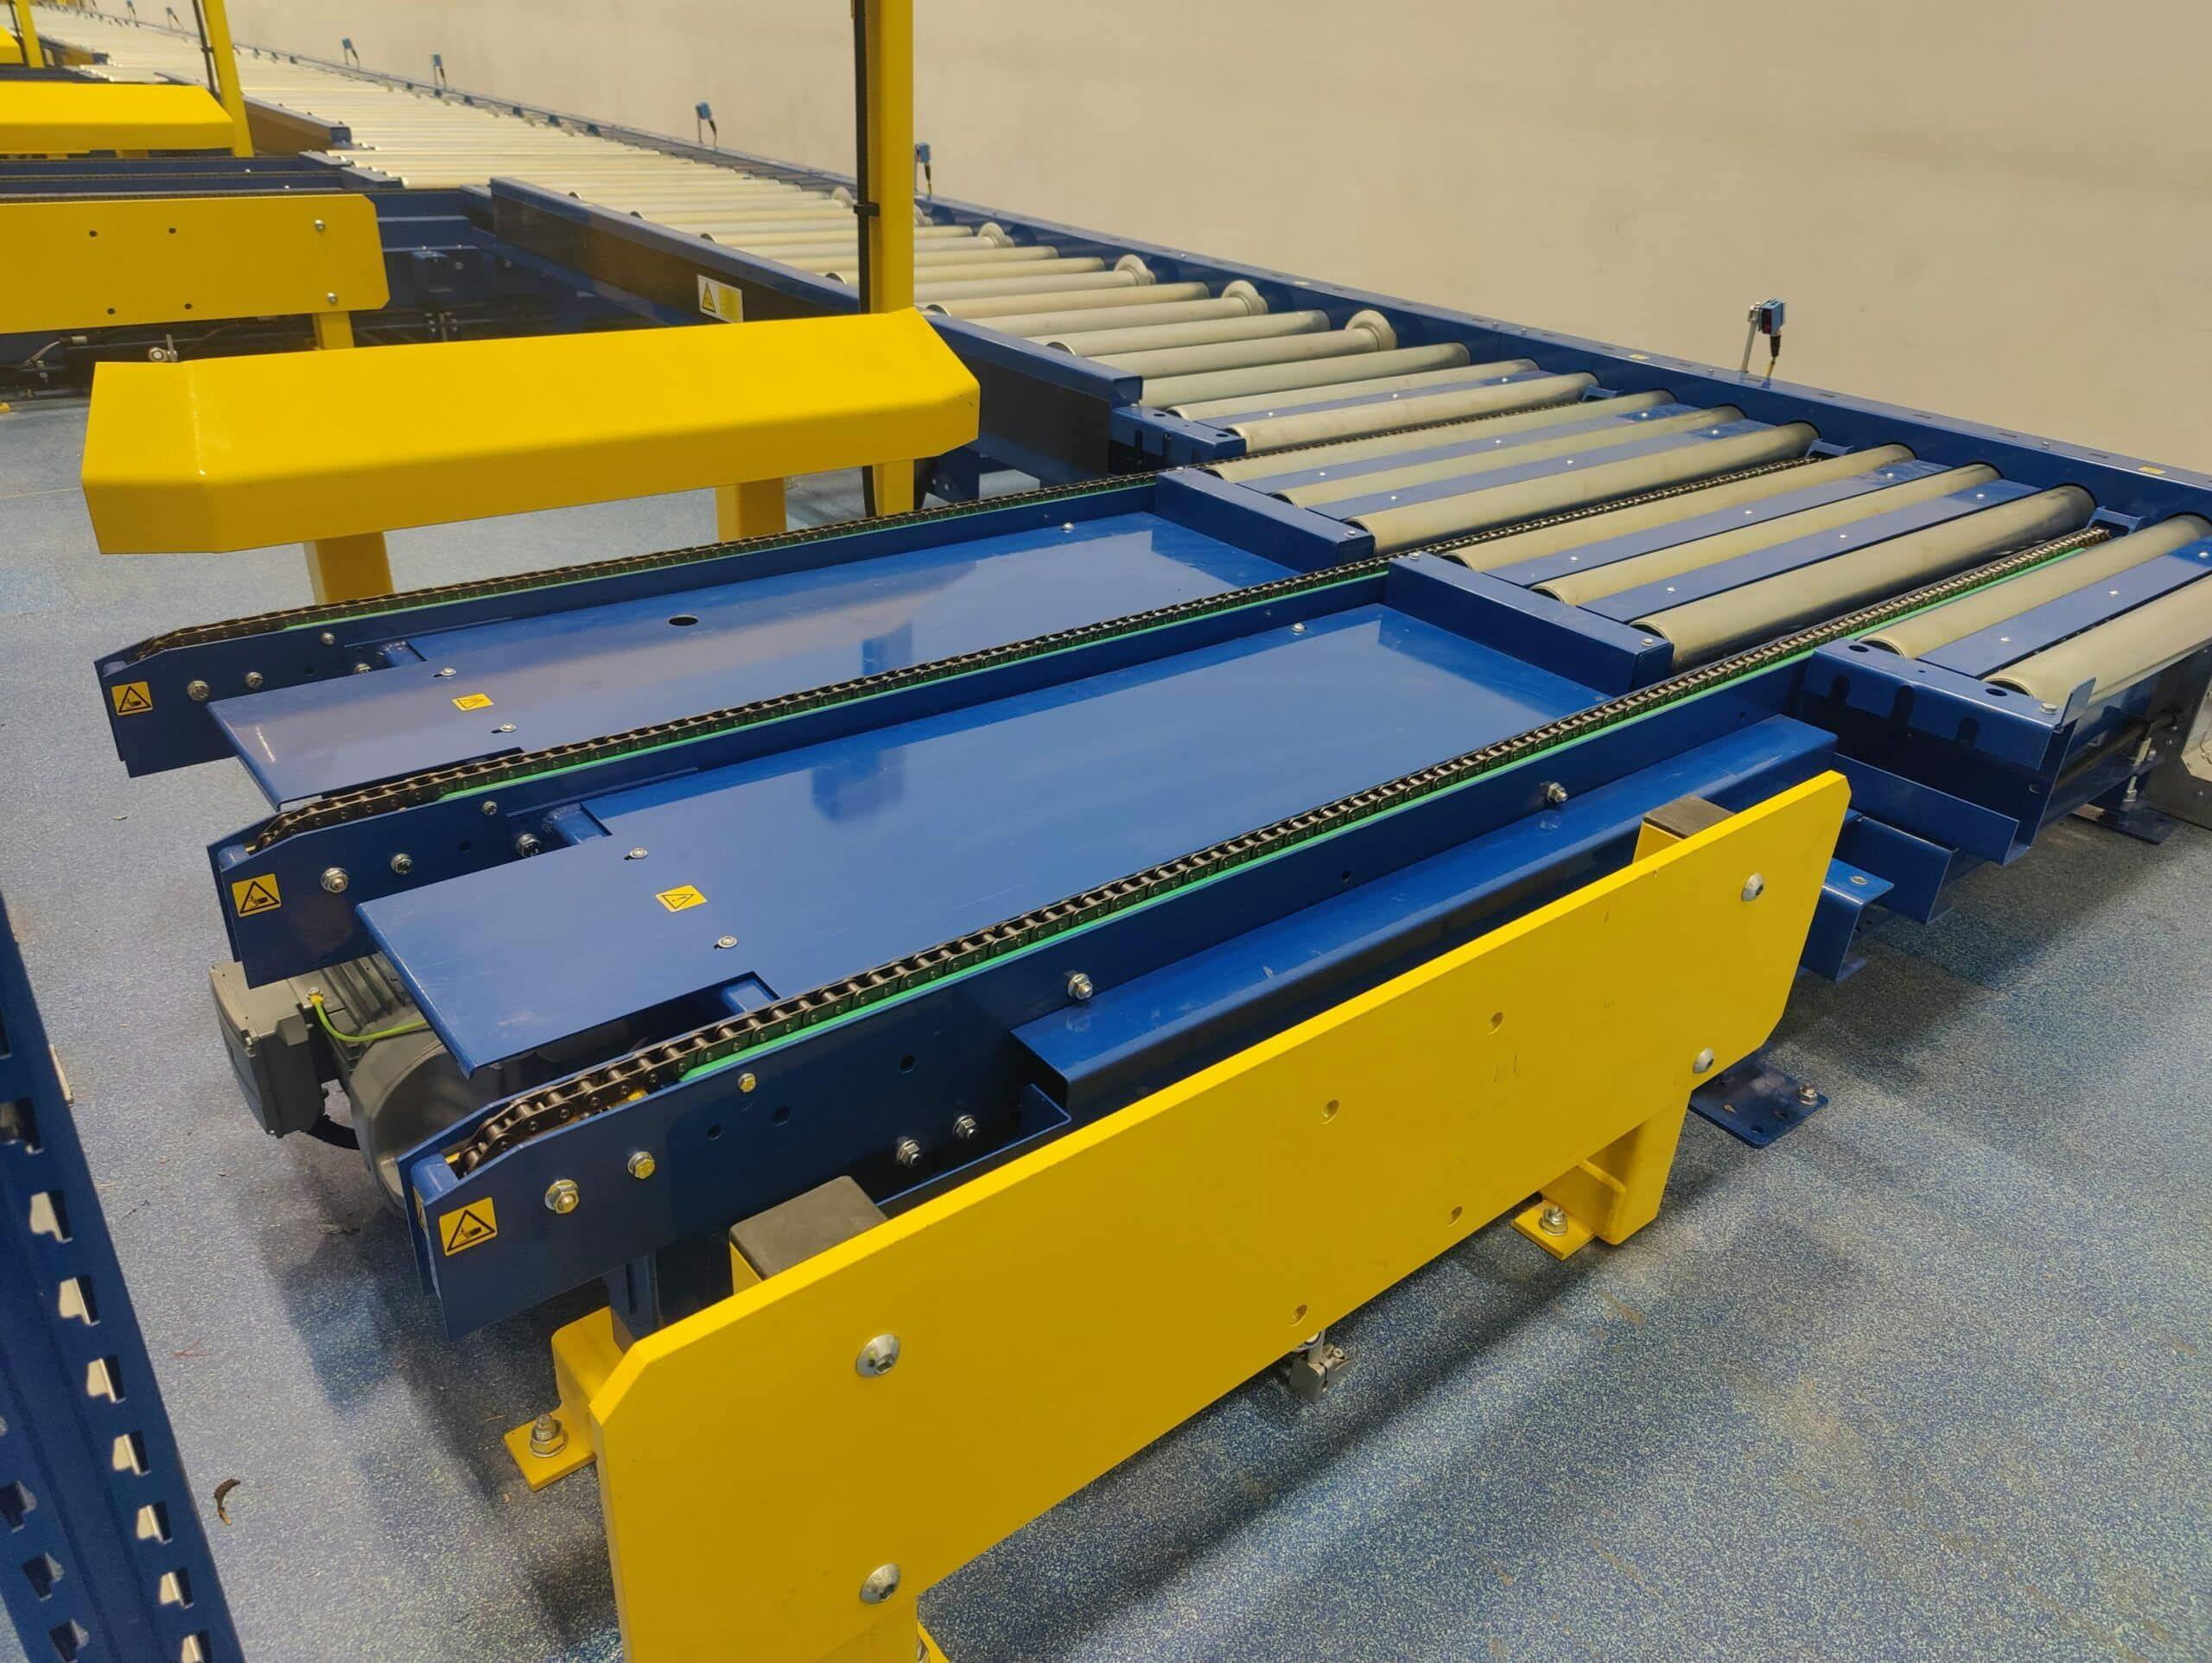 Factors To Consider When Choosing A Pallet Conveyor System